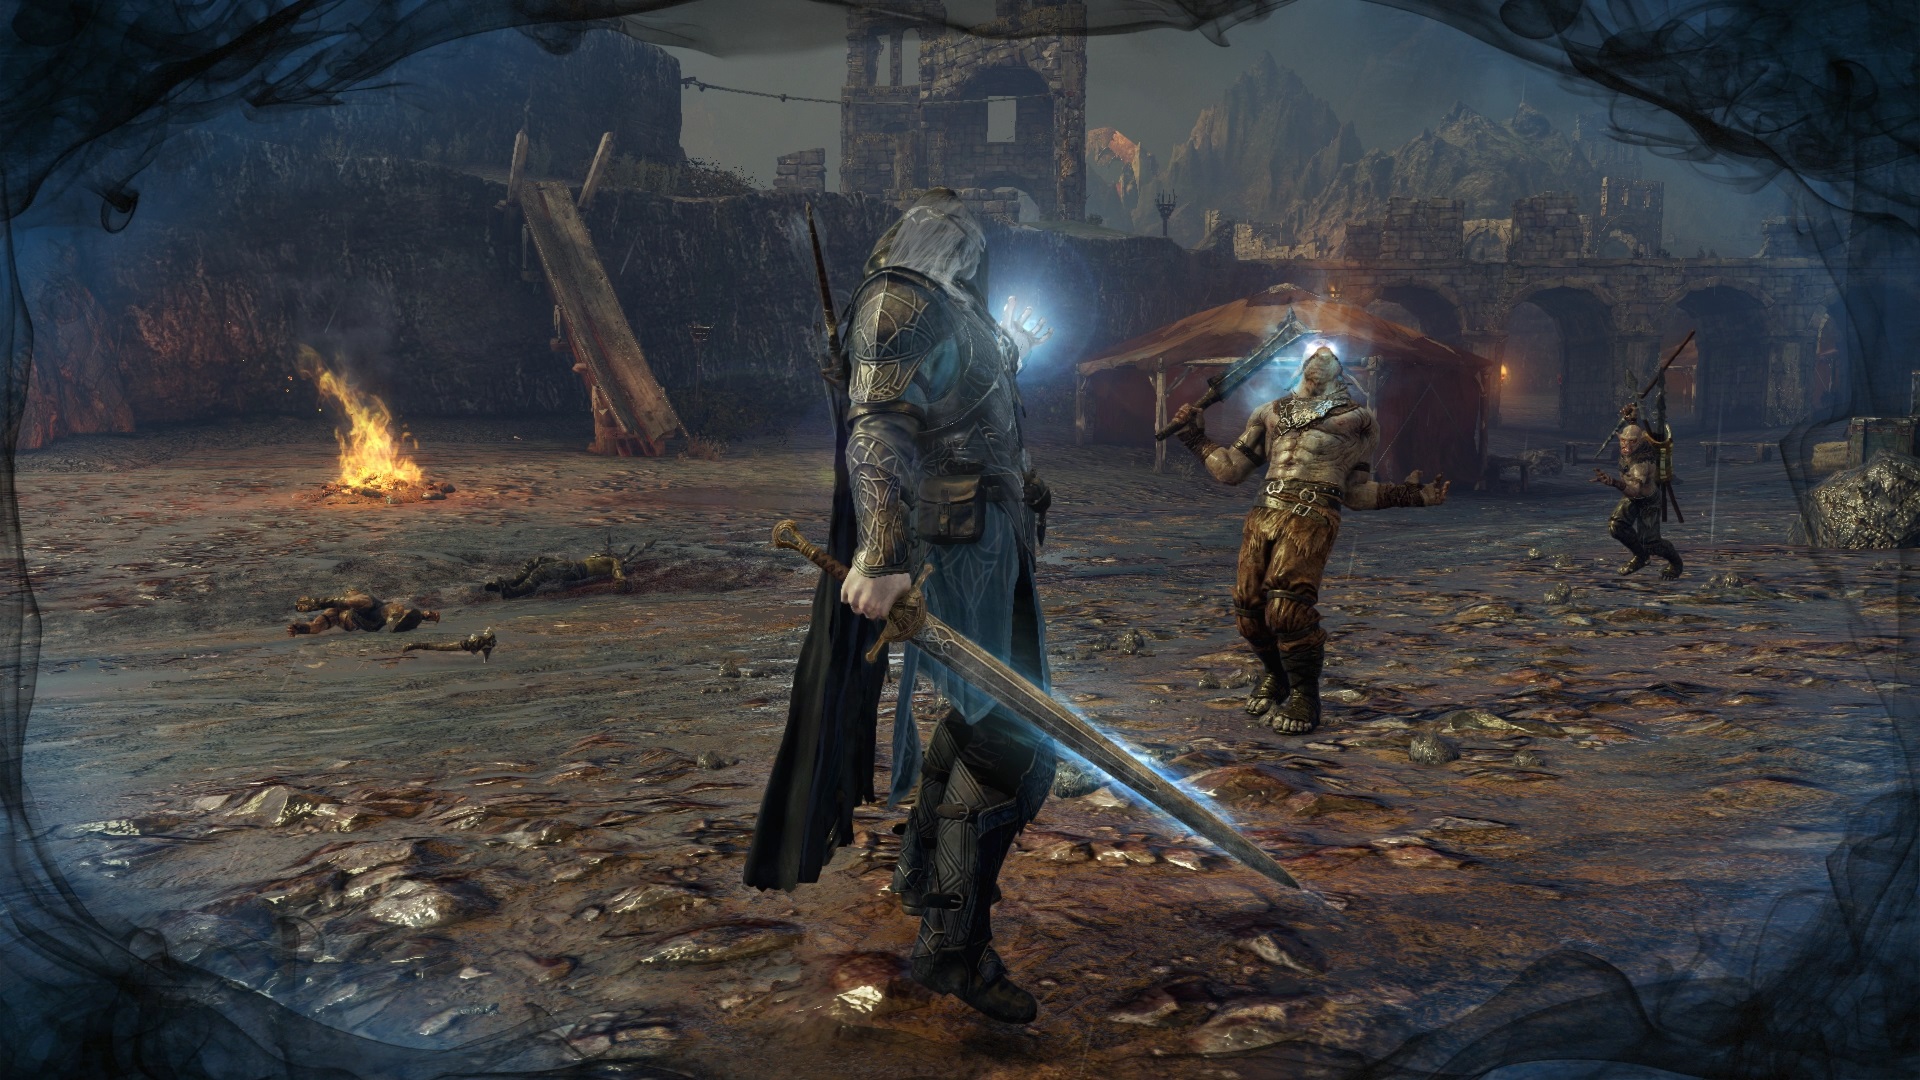 General 1920x1080 Middle-Earth Middle-earth: Shadow of Mordor video games Monolith Productions Warner Brothers